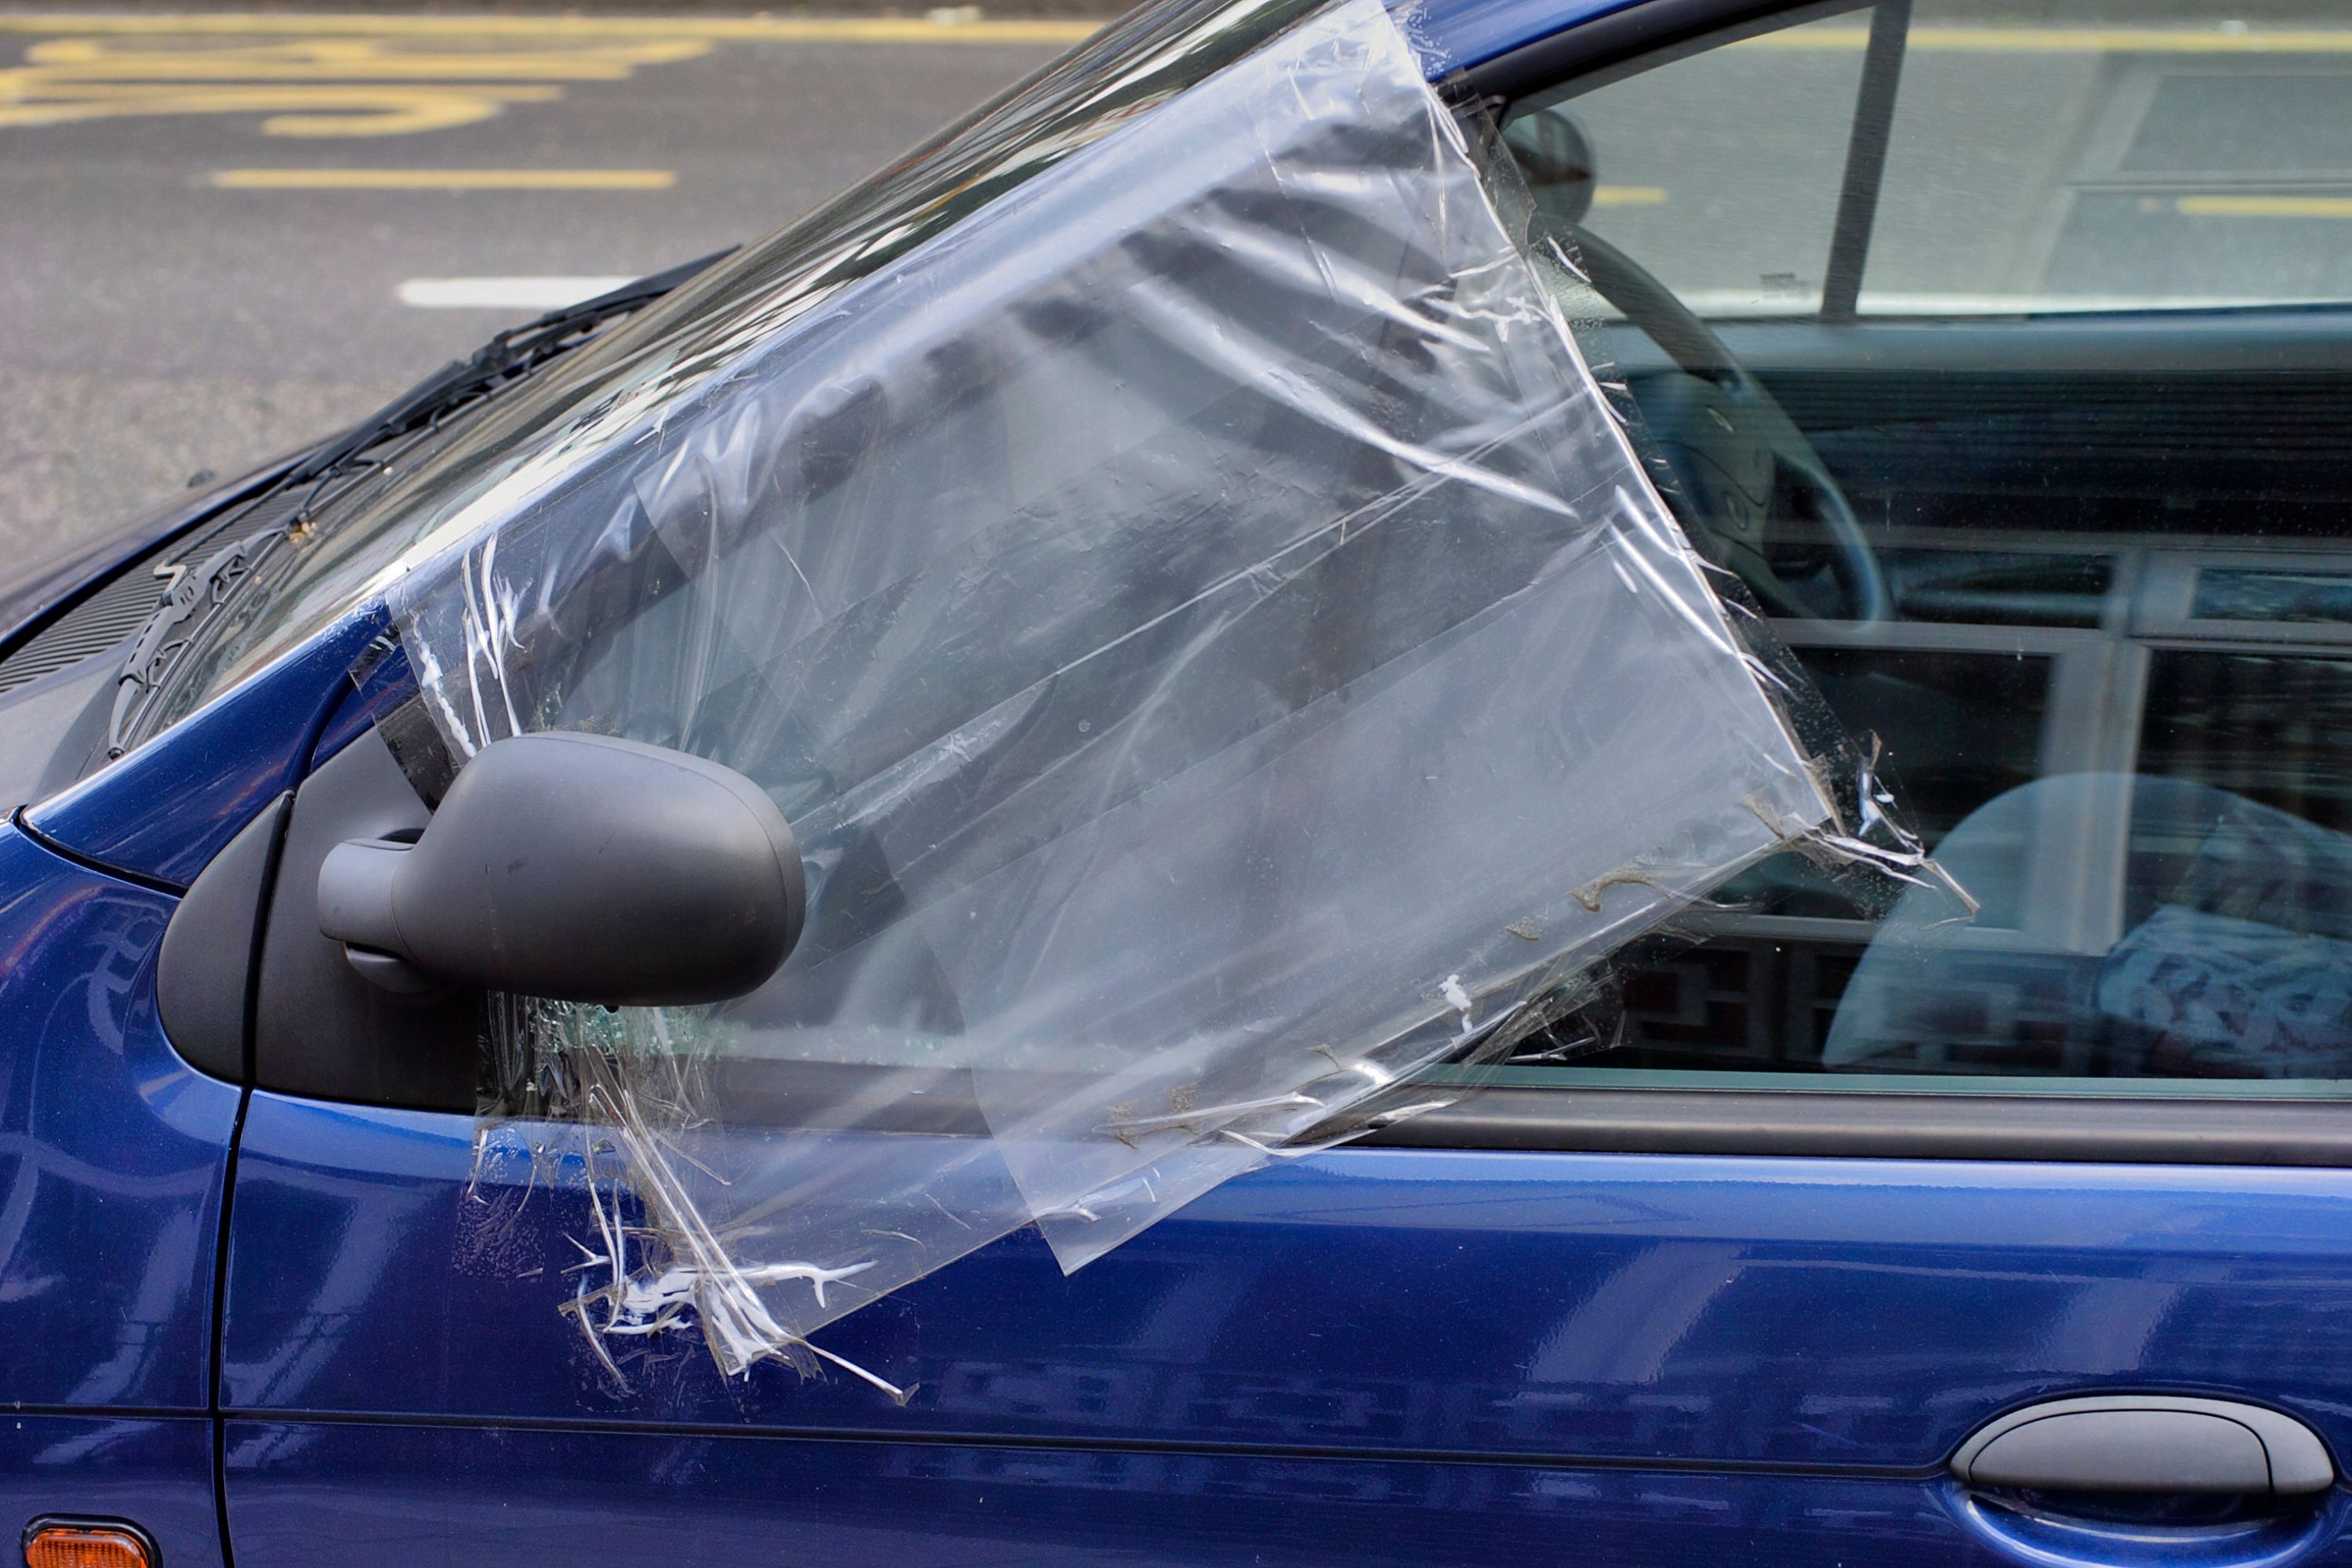 Supplies Needed For the Broken Car Window Cover (2)